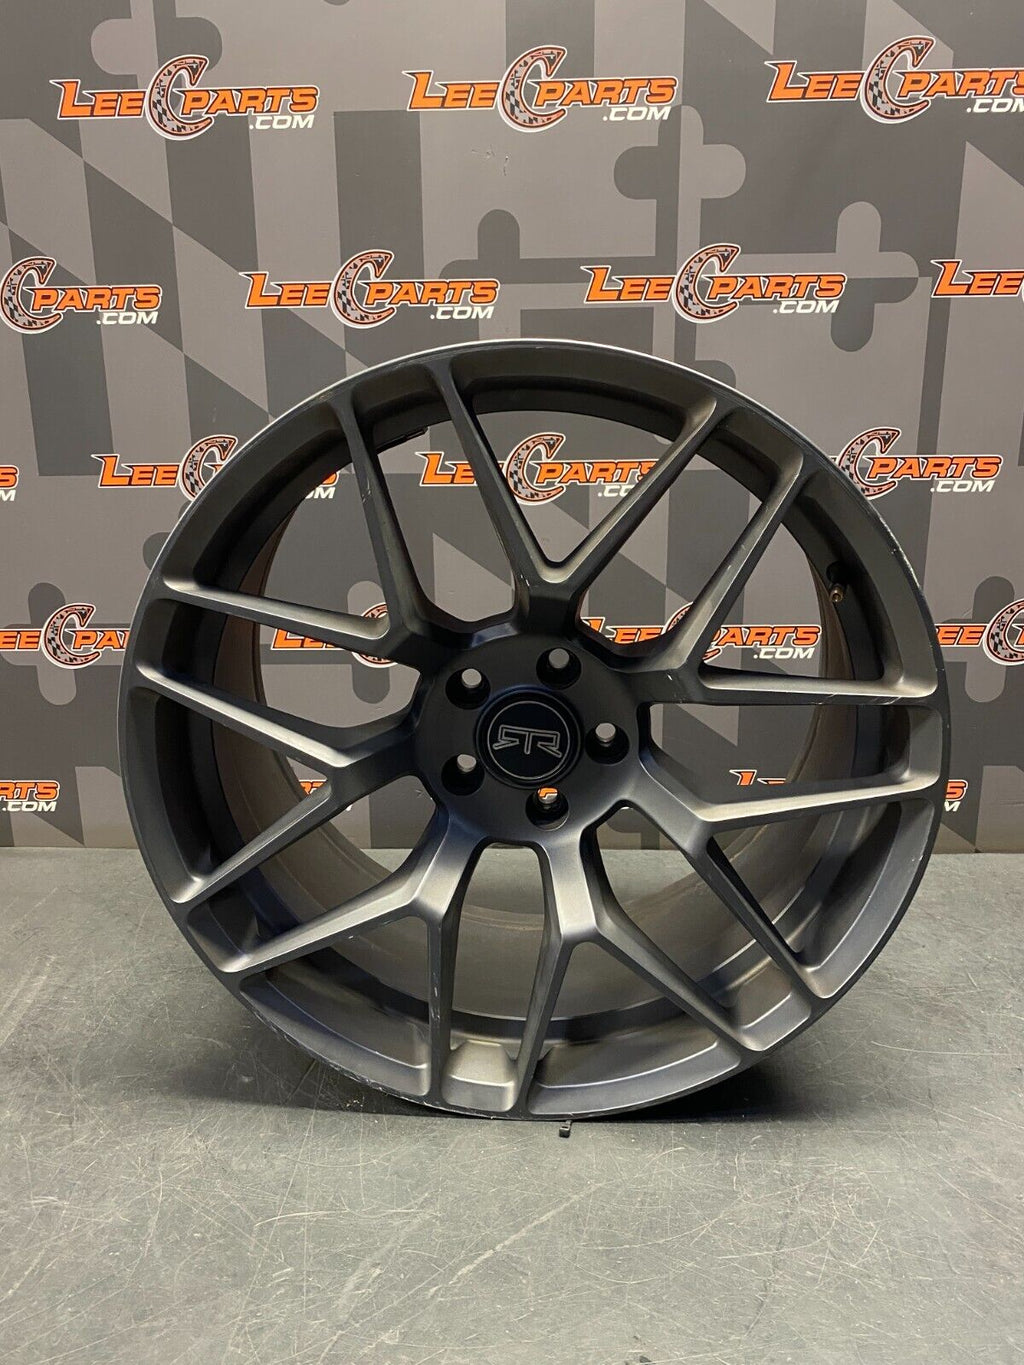 2018 FORD MUSTANG GT PP1 RTR WHEELS TECH 7 20x9.5+33 RIM (1) USED